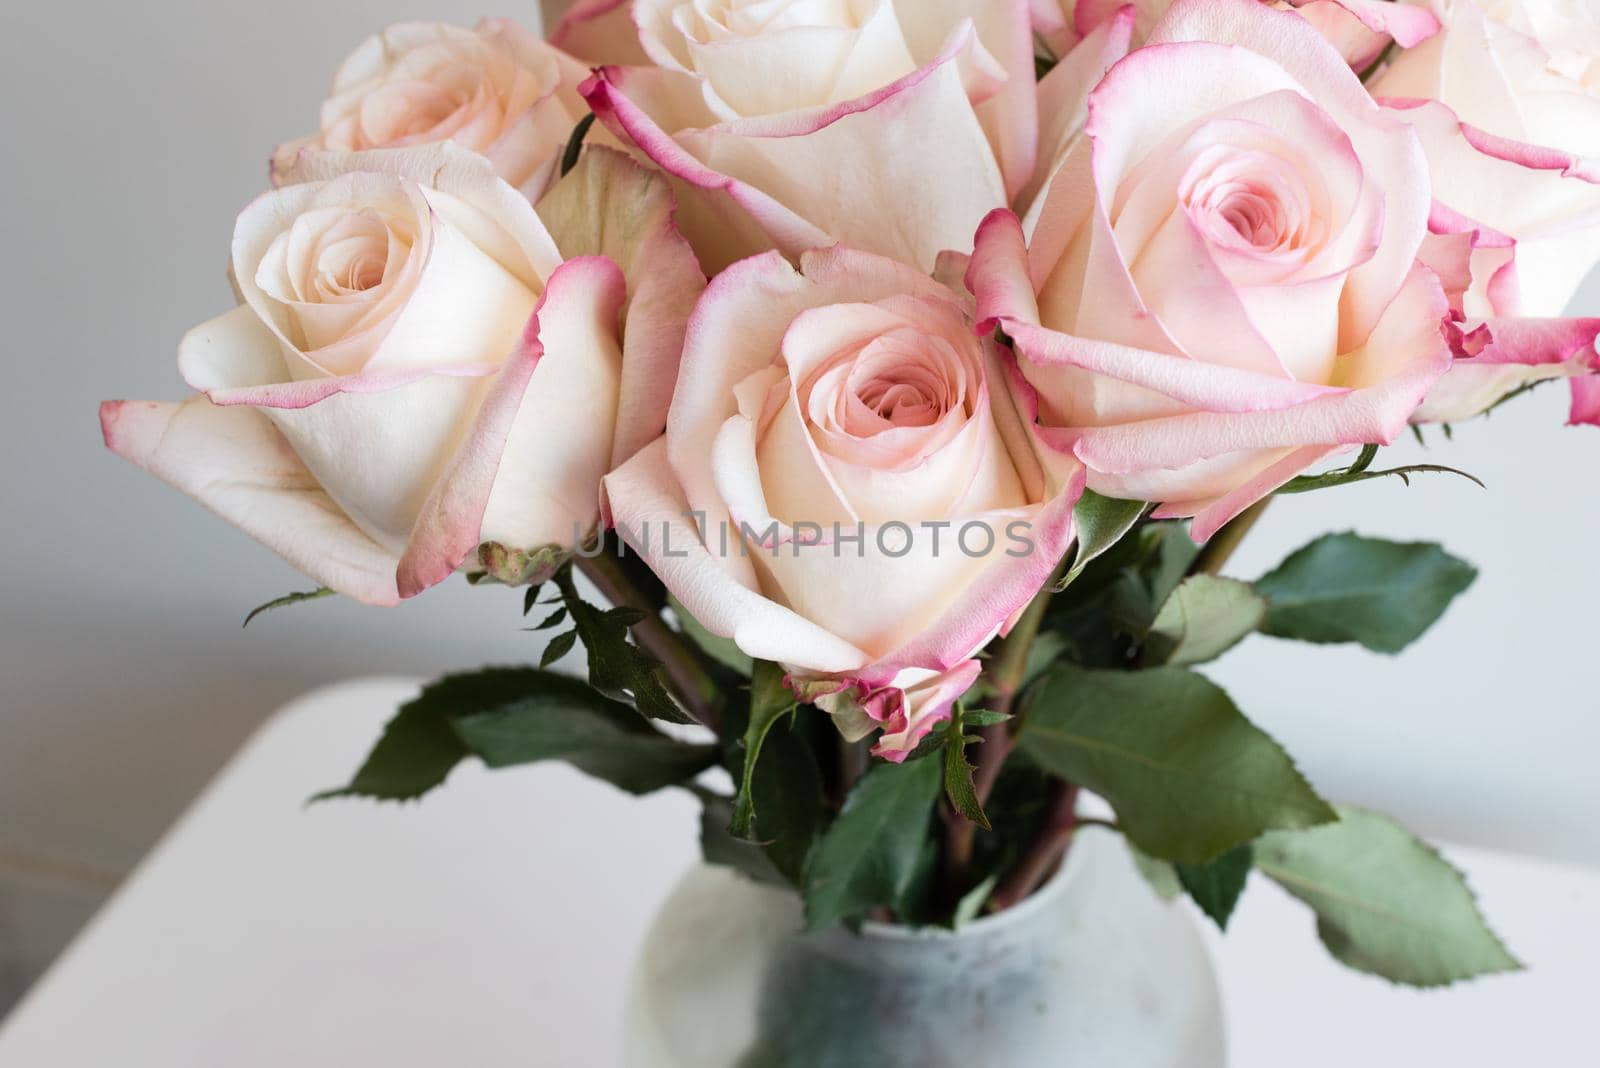 Close up of pink and cream roses in glass vase on white table (cropped and selective focus) by natalie_board